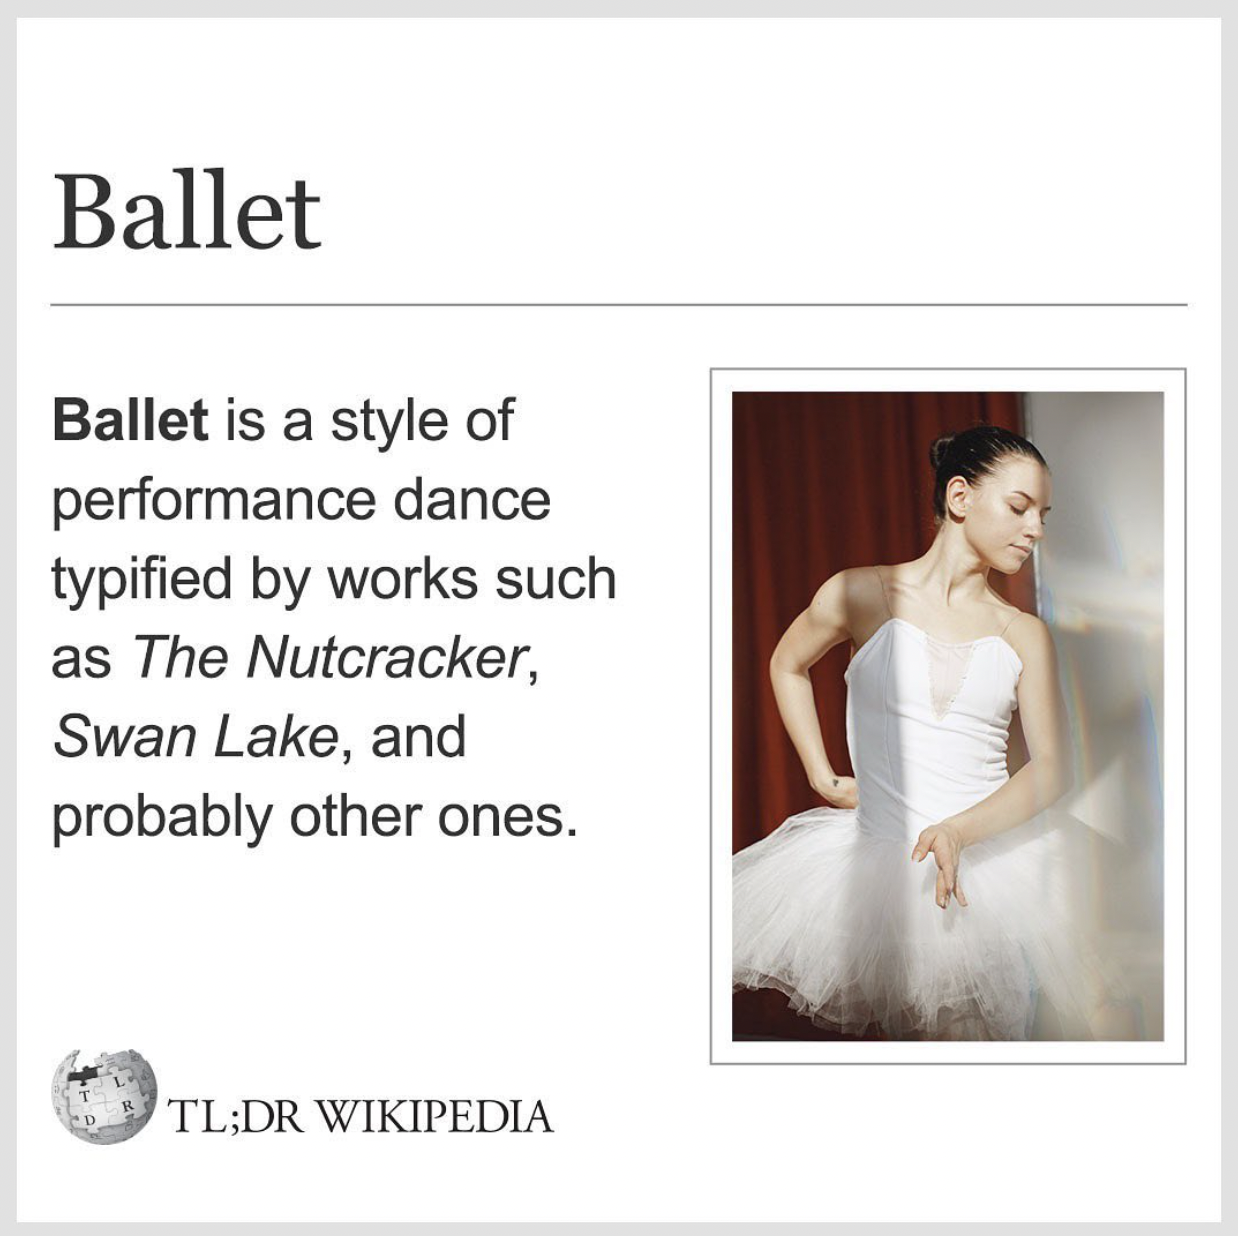 Wikipedia Memes - Китайска Азбука - Ballet Ballet is a style of performance dance typified by works such as The Nutcracker, Swan Lake, and probably other ones. Tl;Dr Wikipedia